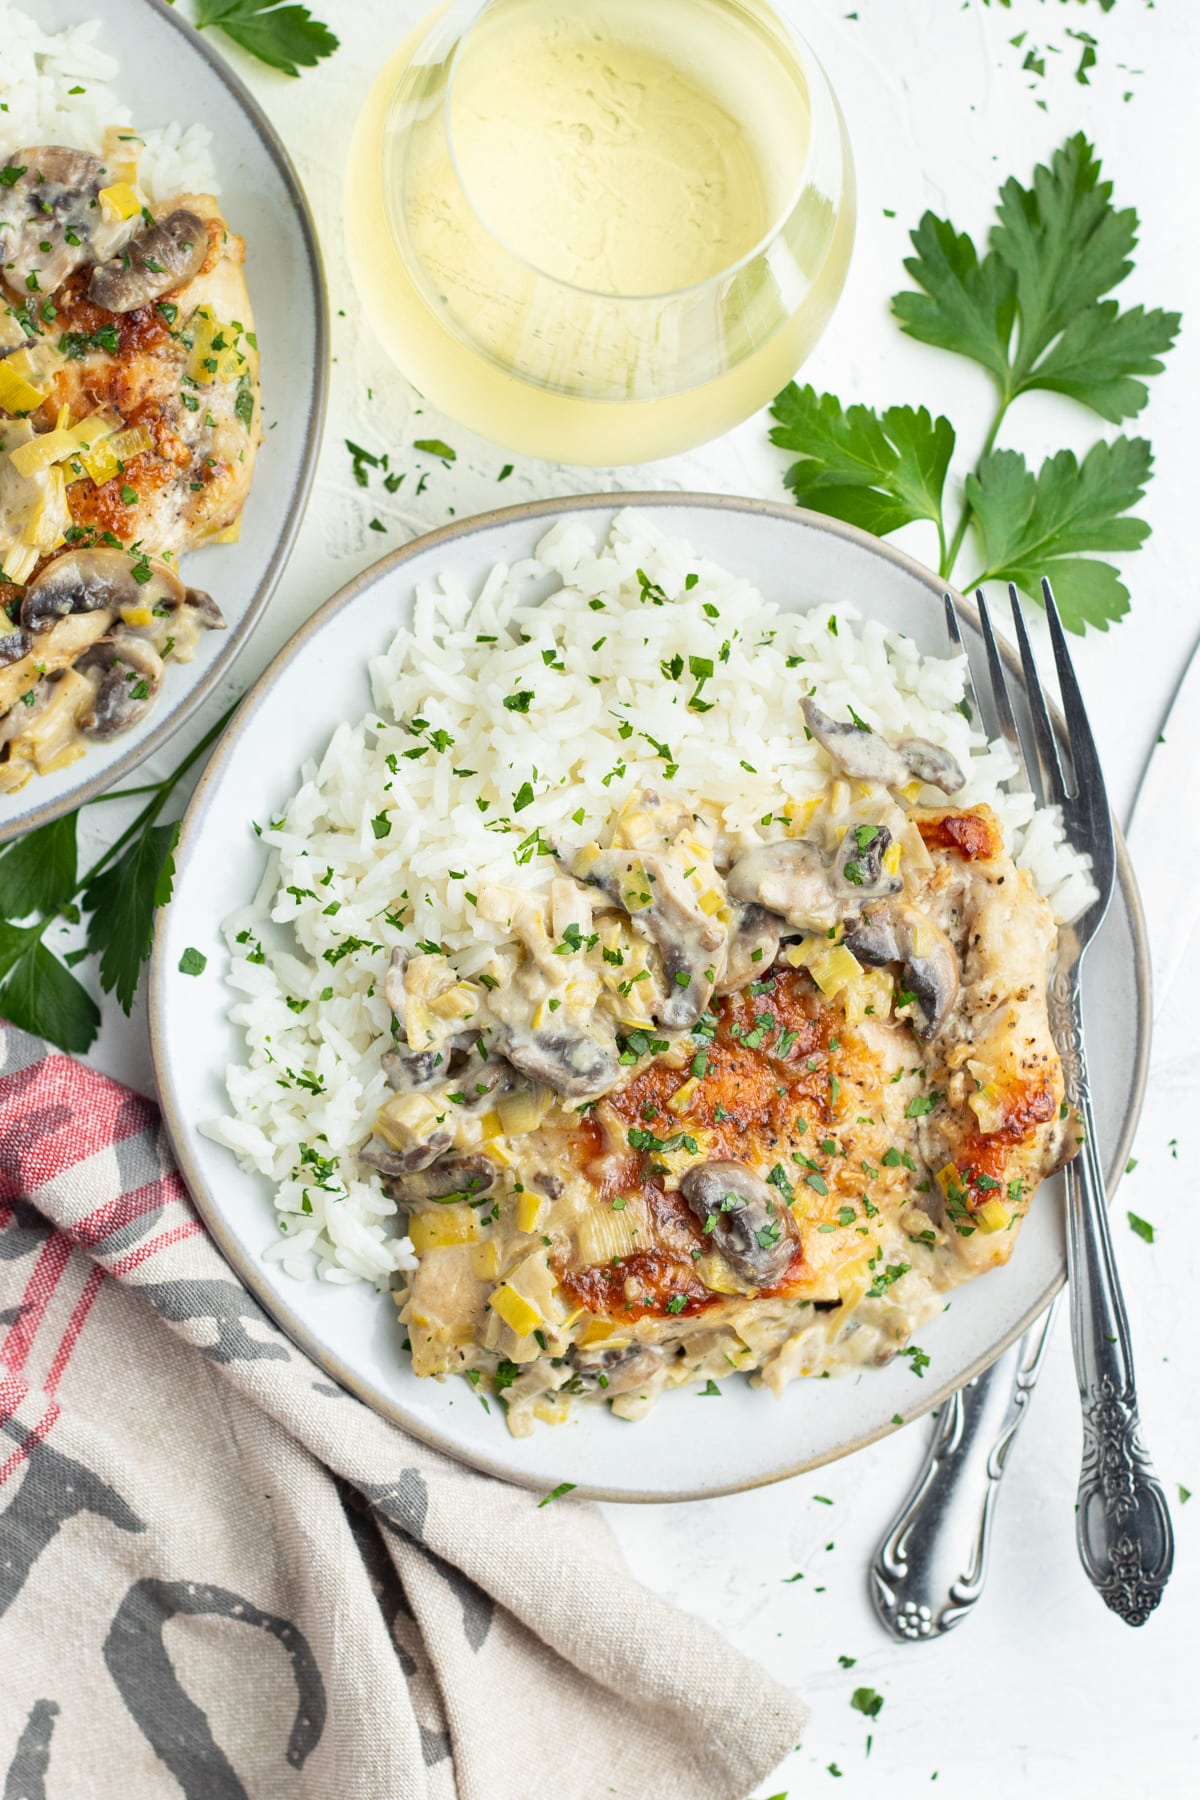 Photo of creamy dijon chicken with mushrooms and leeks with a glass of white wine.